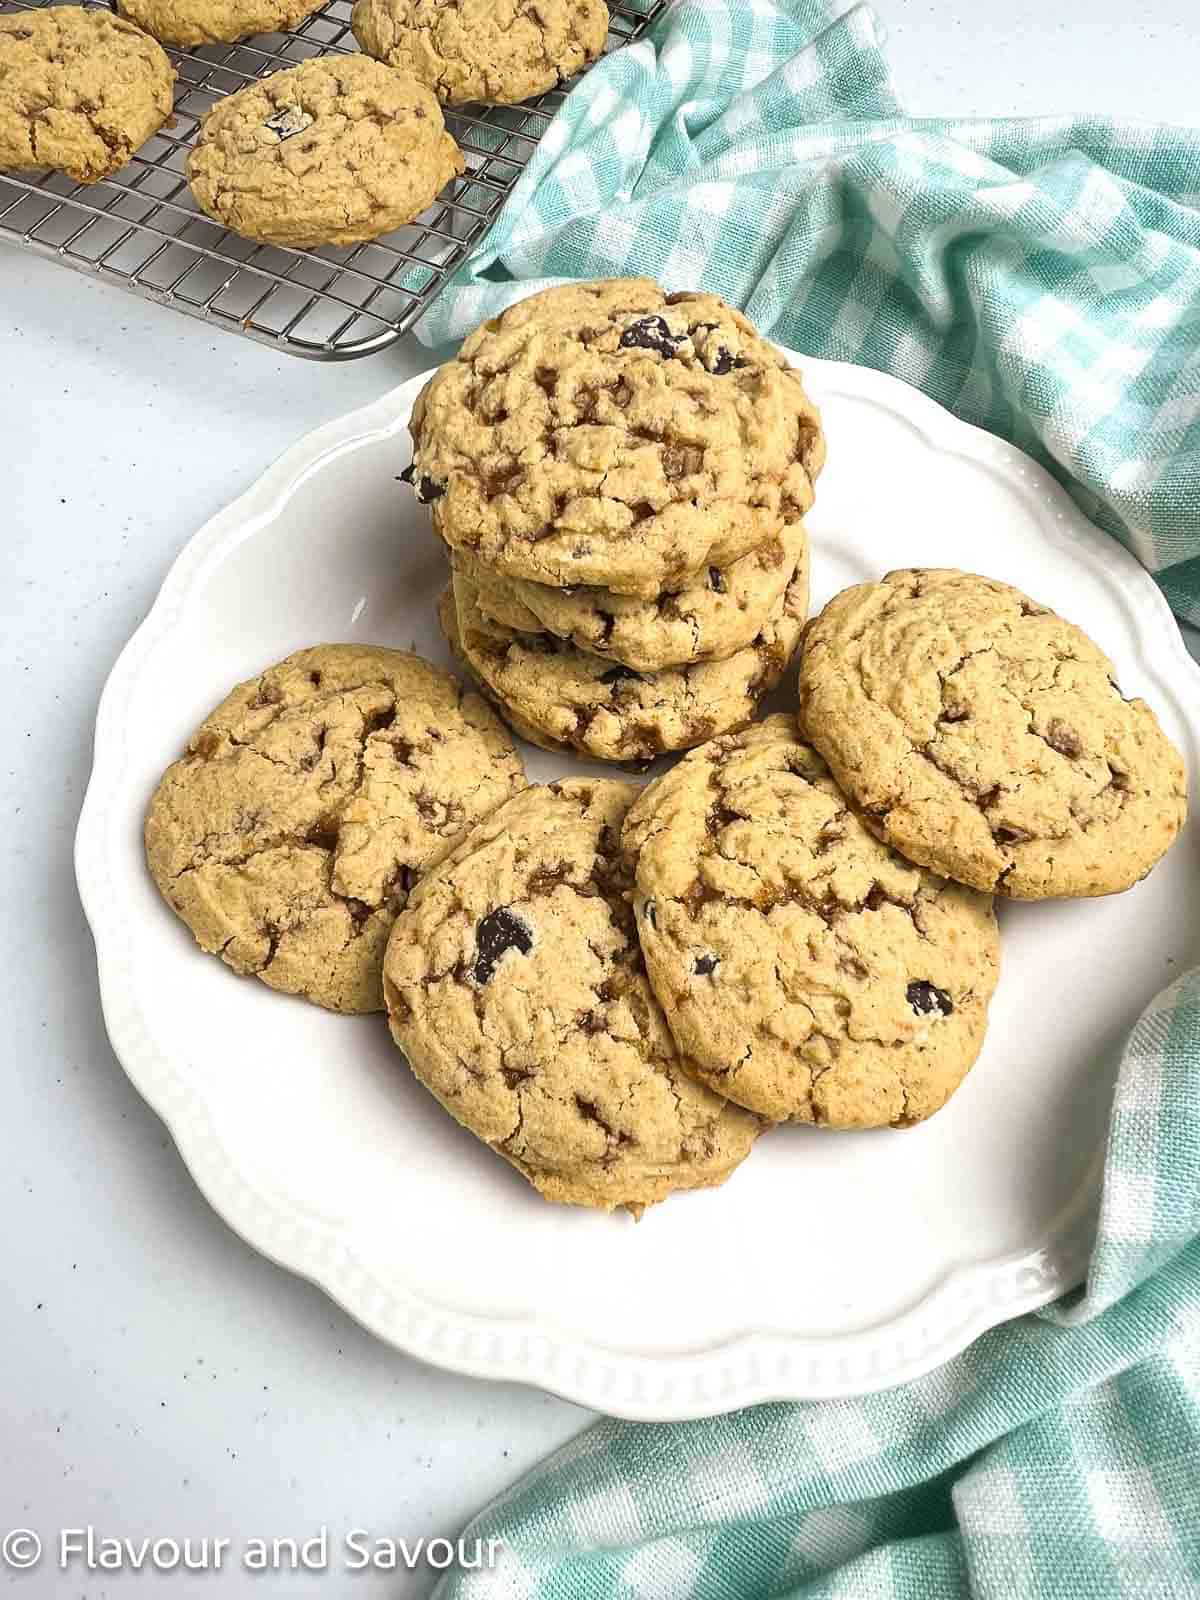 Gluten-free chocolate chip cookies with toffee bits in a plate.